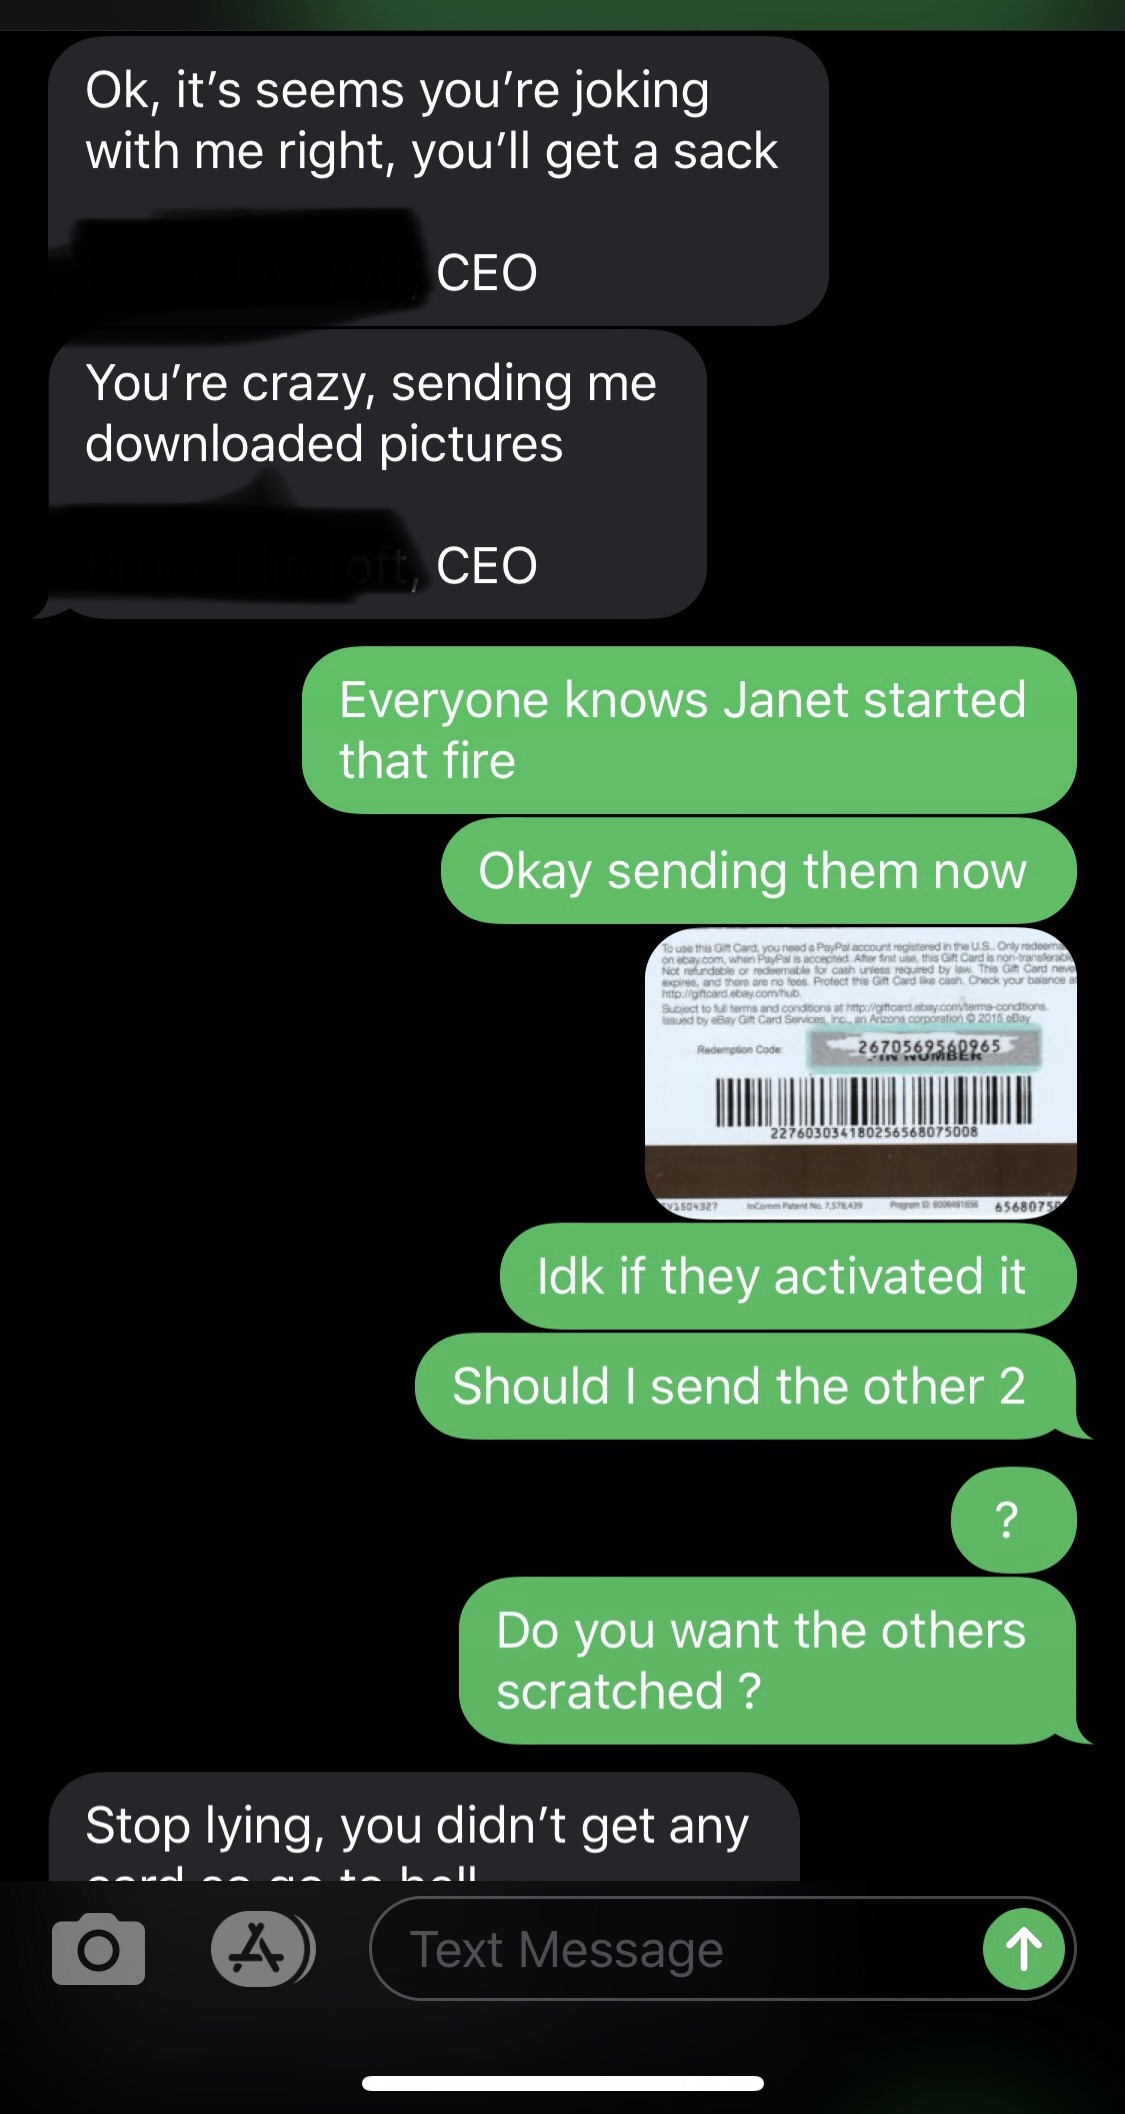 multimedia - Ok, it's seems you're joking with me right, you'll get a sack Ceo You're crazy, sending me downloaded pictures Ceo Everyone knows Janet started that fire Okay sending them now To use this Gr Card, you need a PayPal account registered in the U